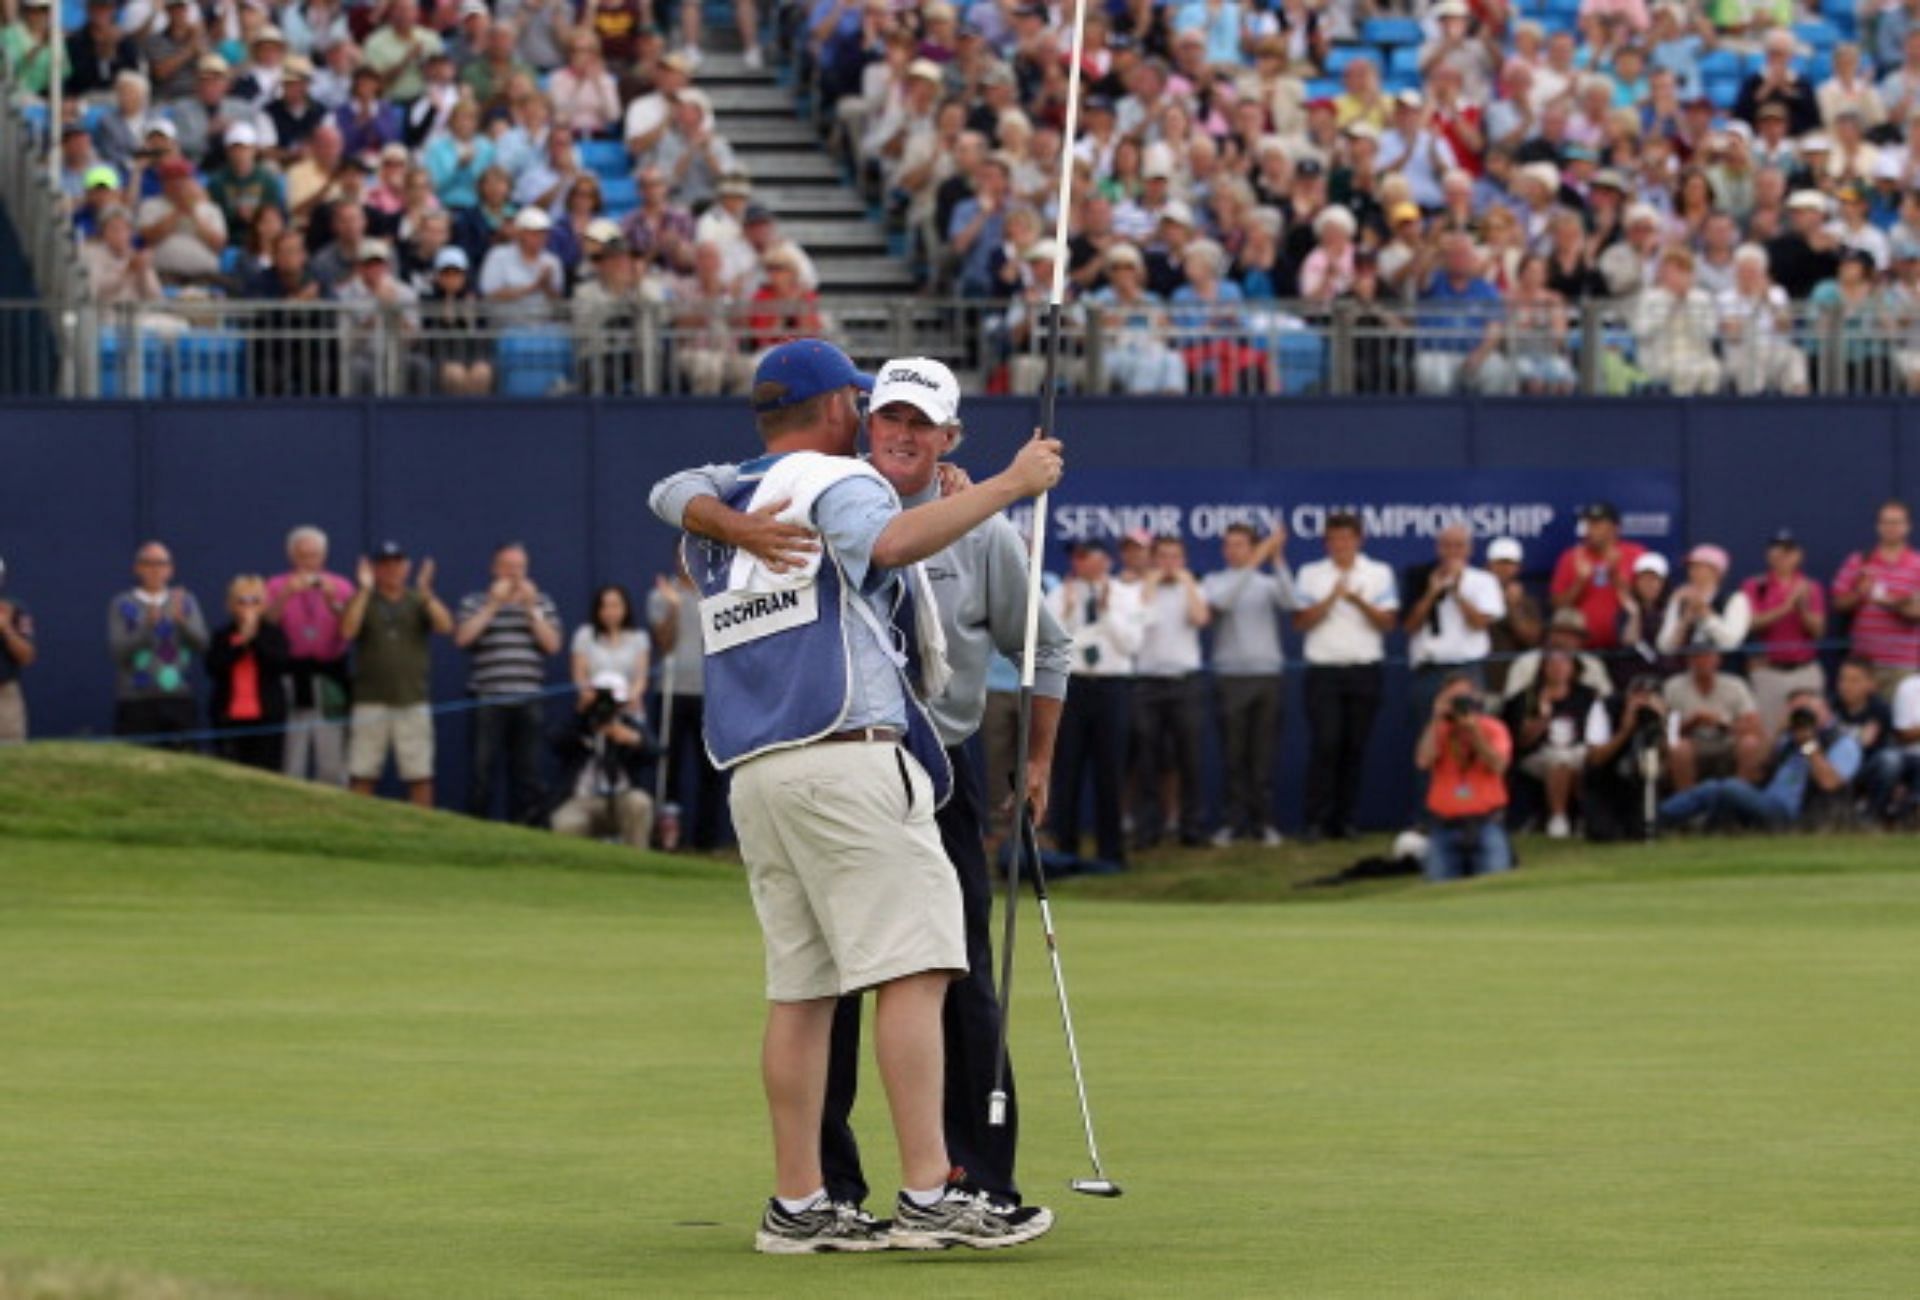 Reed Cochran caddying for his father in 2011 (Image via Getty).